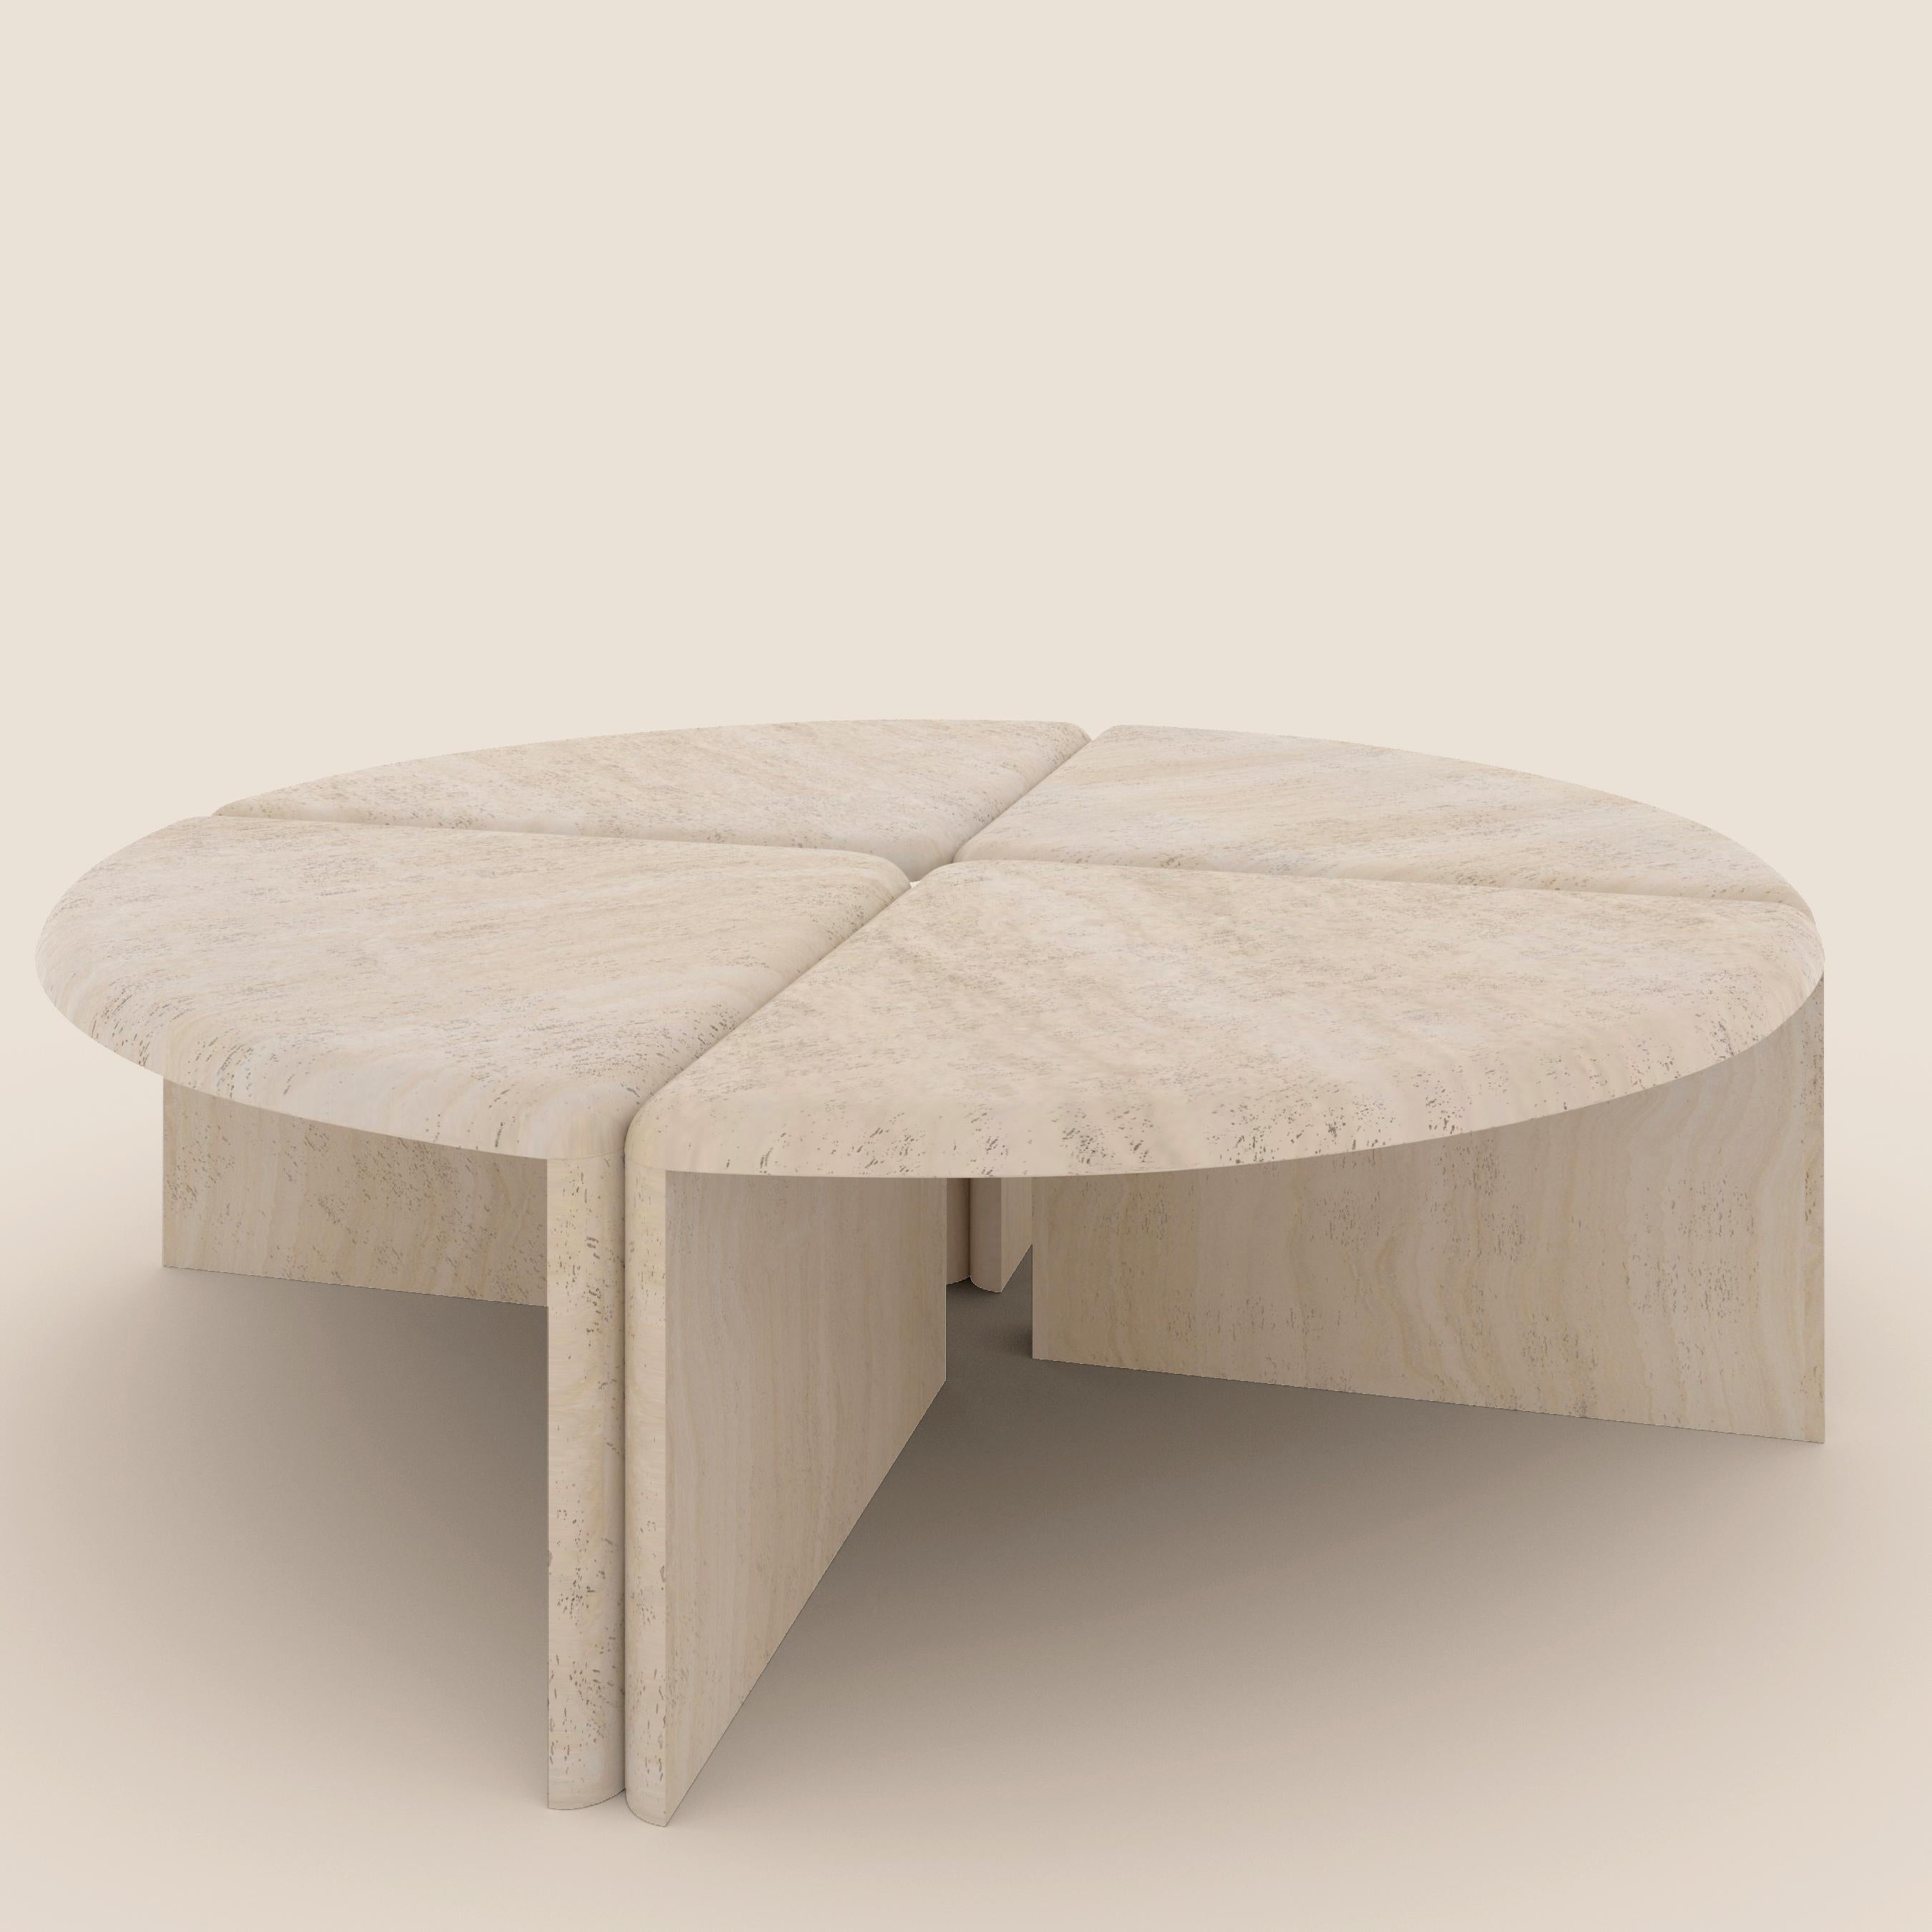 Lily Round Navona Travertine Coffee Table by Fred and Juul
Dimensions: Ø 122 x H 36 cm.
Materials: Honed Navona Travertine.

Available in oak, evonized oak and in Navona Travertine. Custom sizes, materials or finishes are available on request.